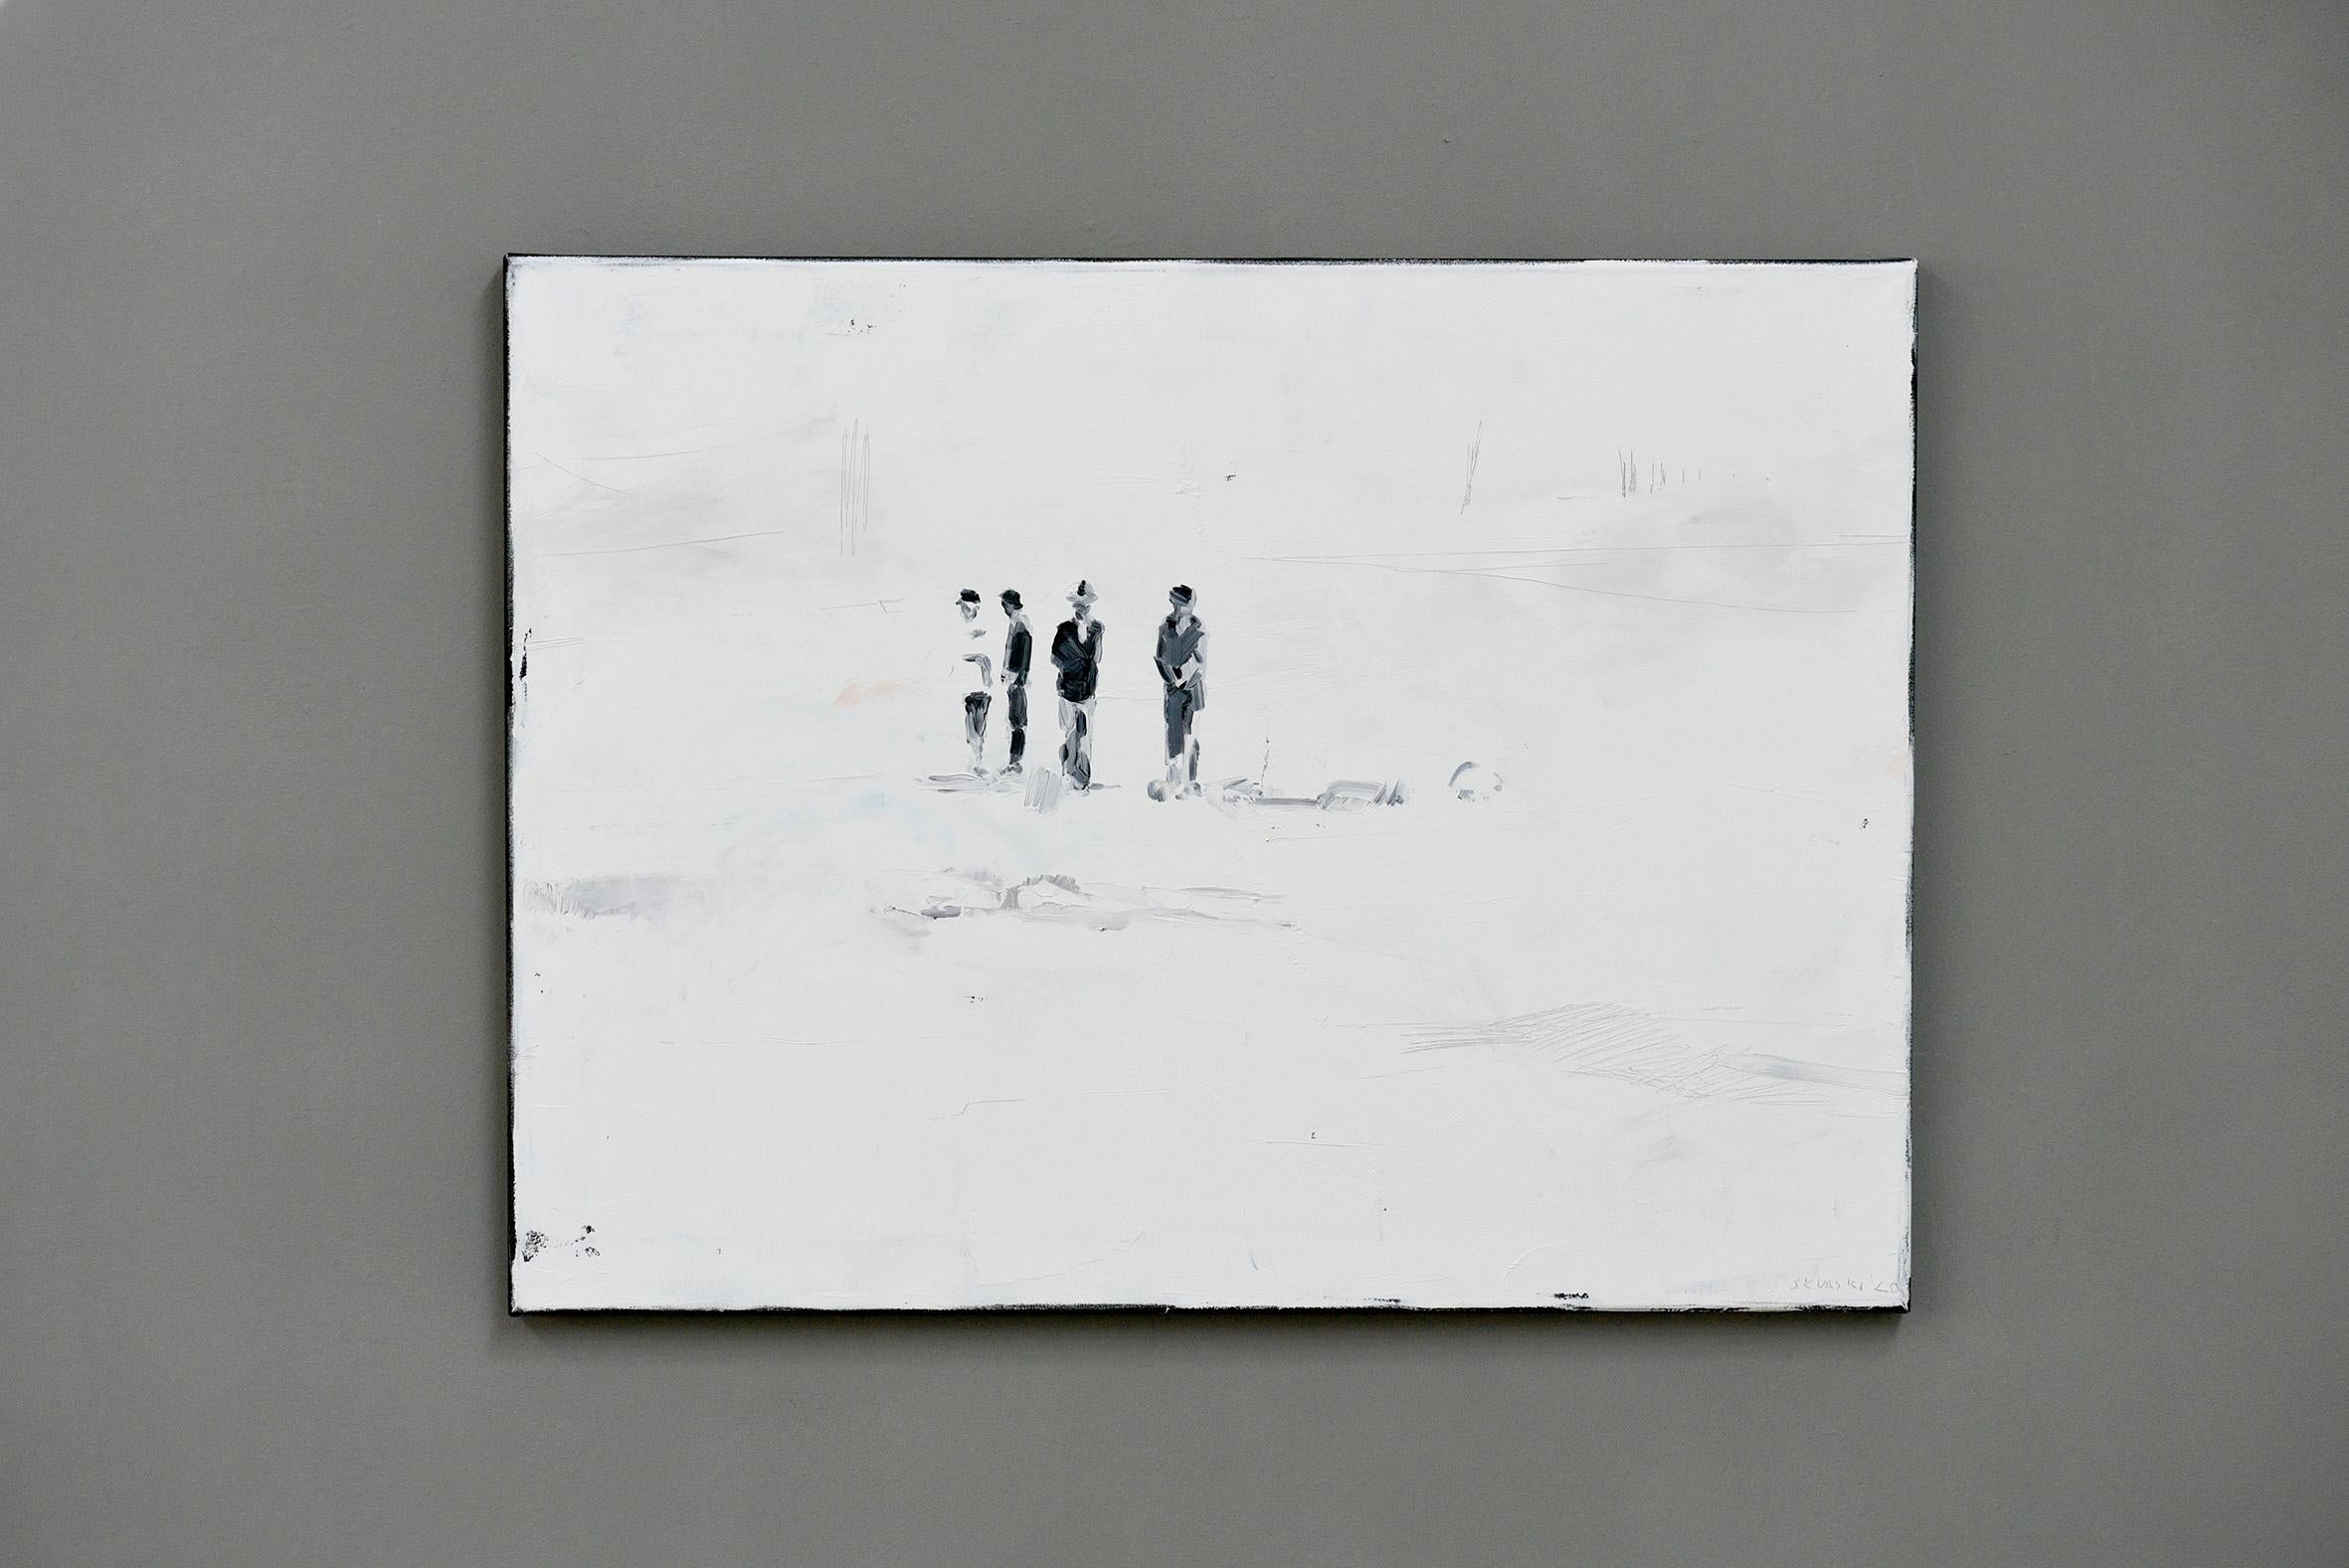 Alabama
60 x 80 cm
oil on canvas 
2020

A wide, apparently endless plain forms the background of the events: out of nowhere, dark figures enter the scenery, as if coming from the depths of the canvas, appearing through layers of bright, shiny white